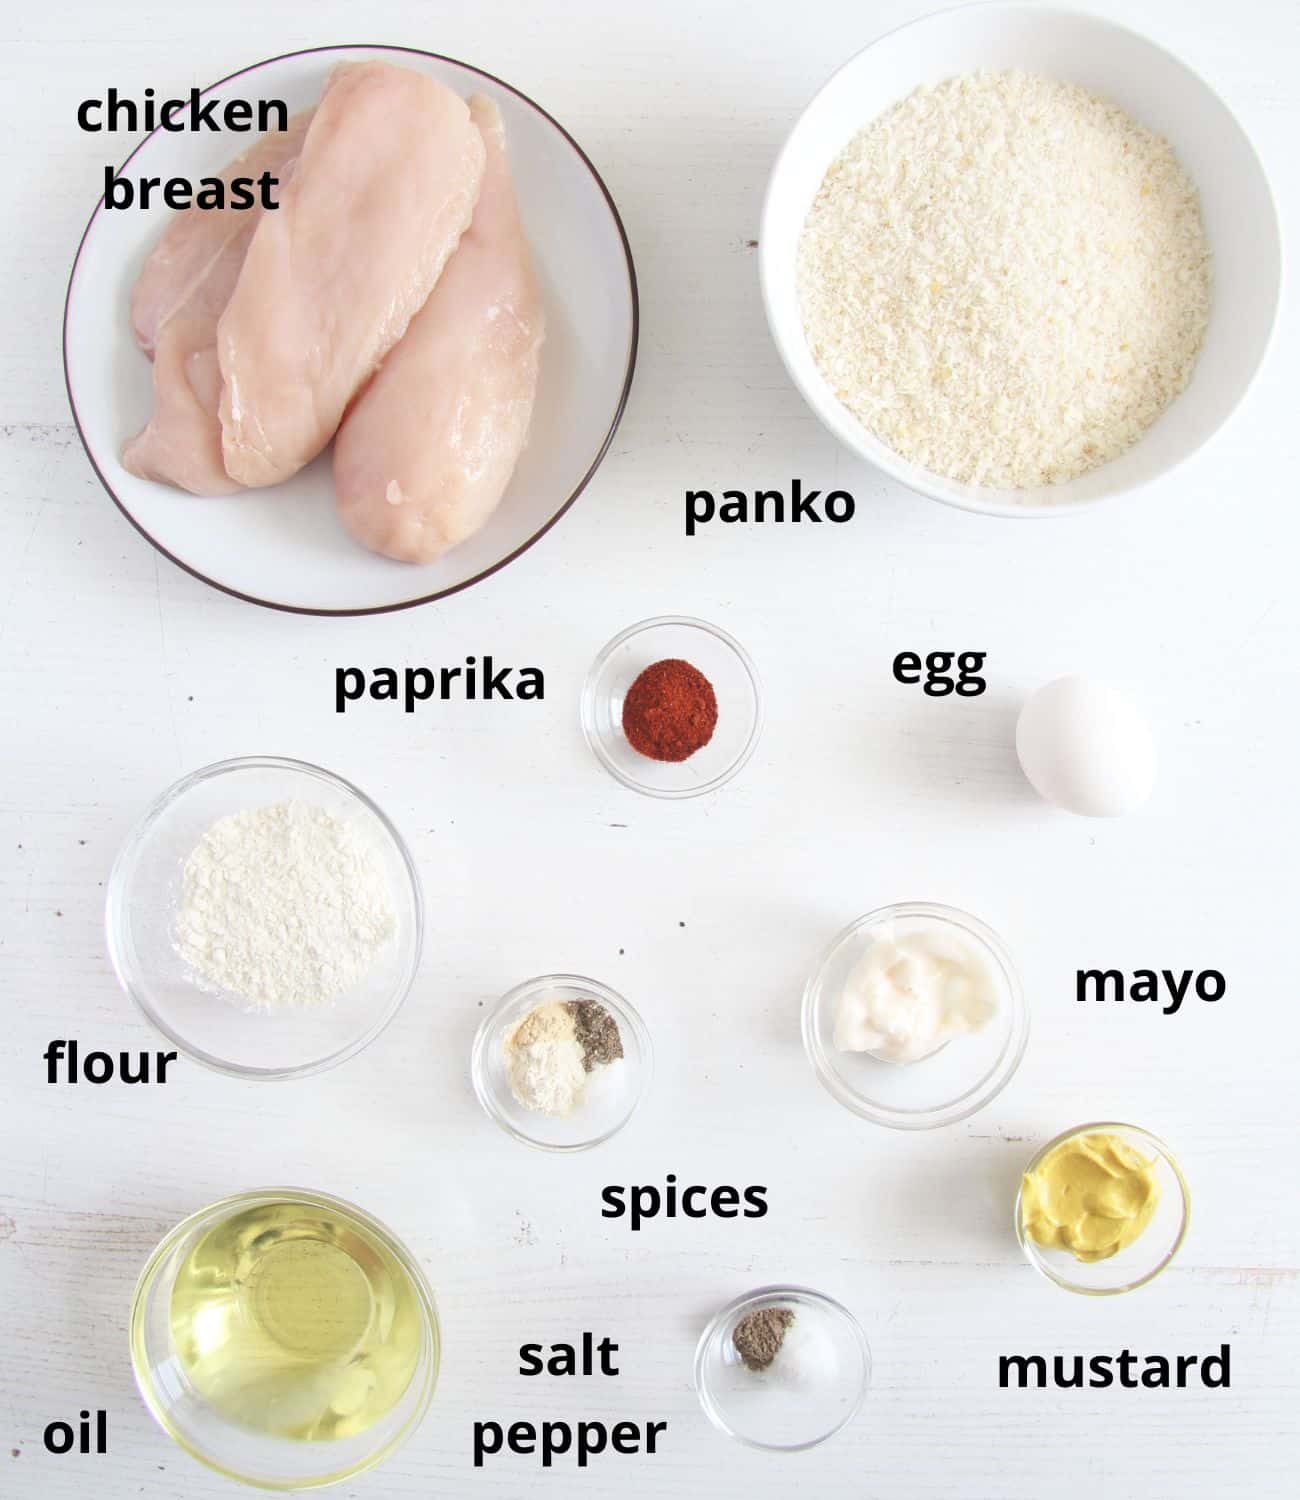 listed ingredients for air frying chicken breast with panko.